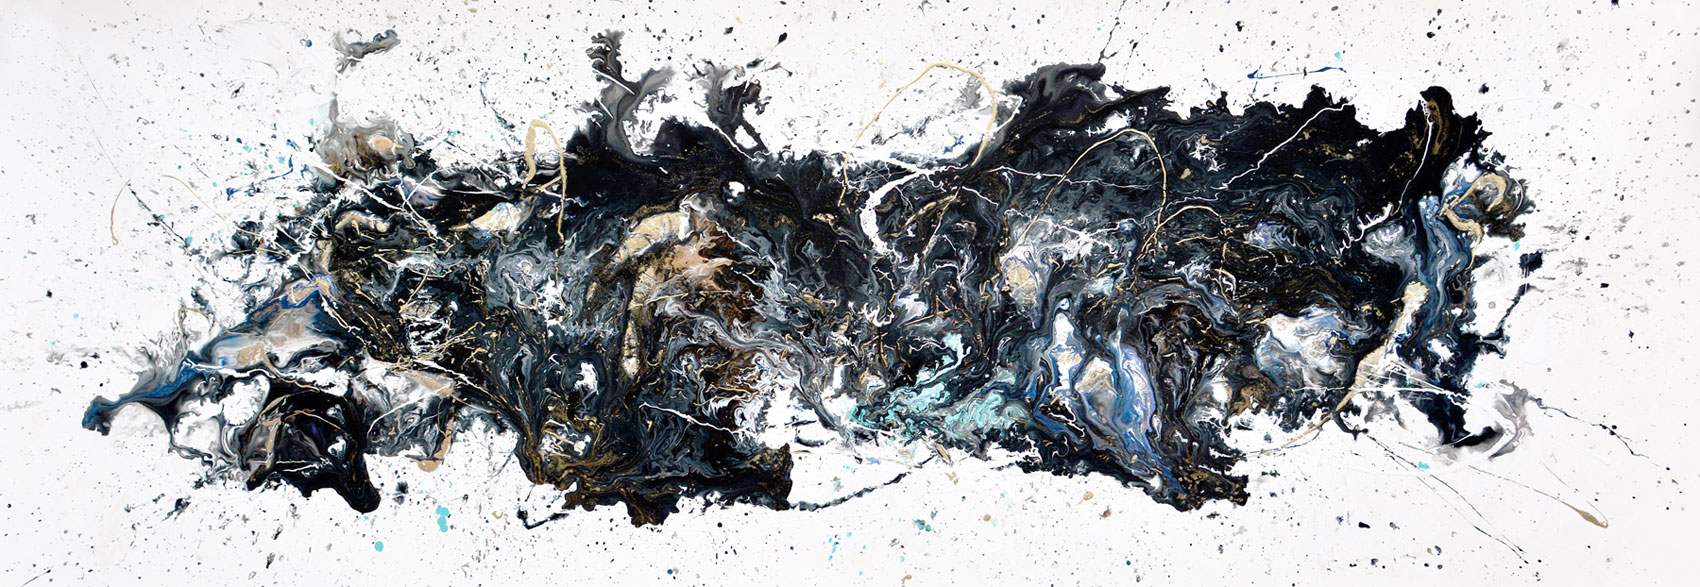 large black and white abstract painting